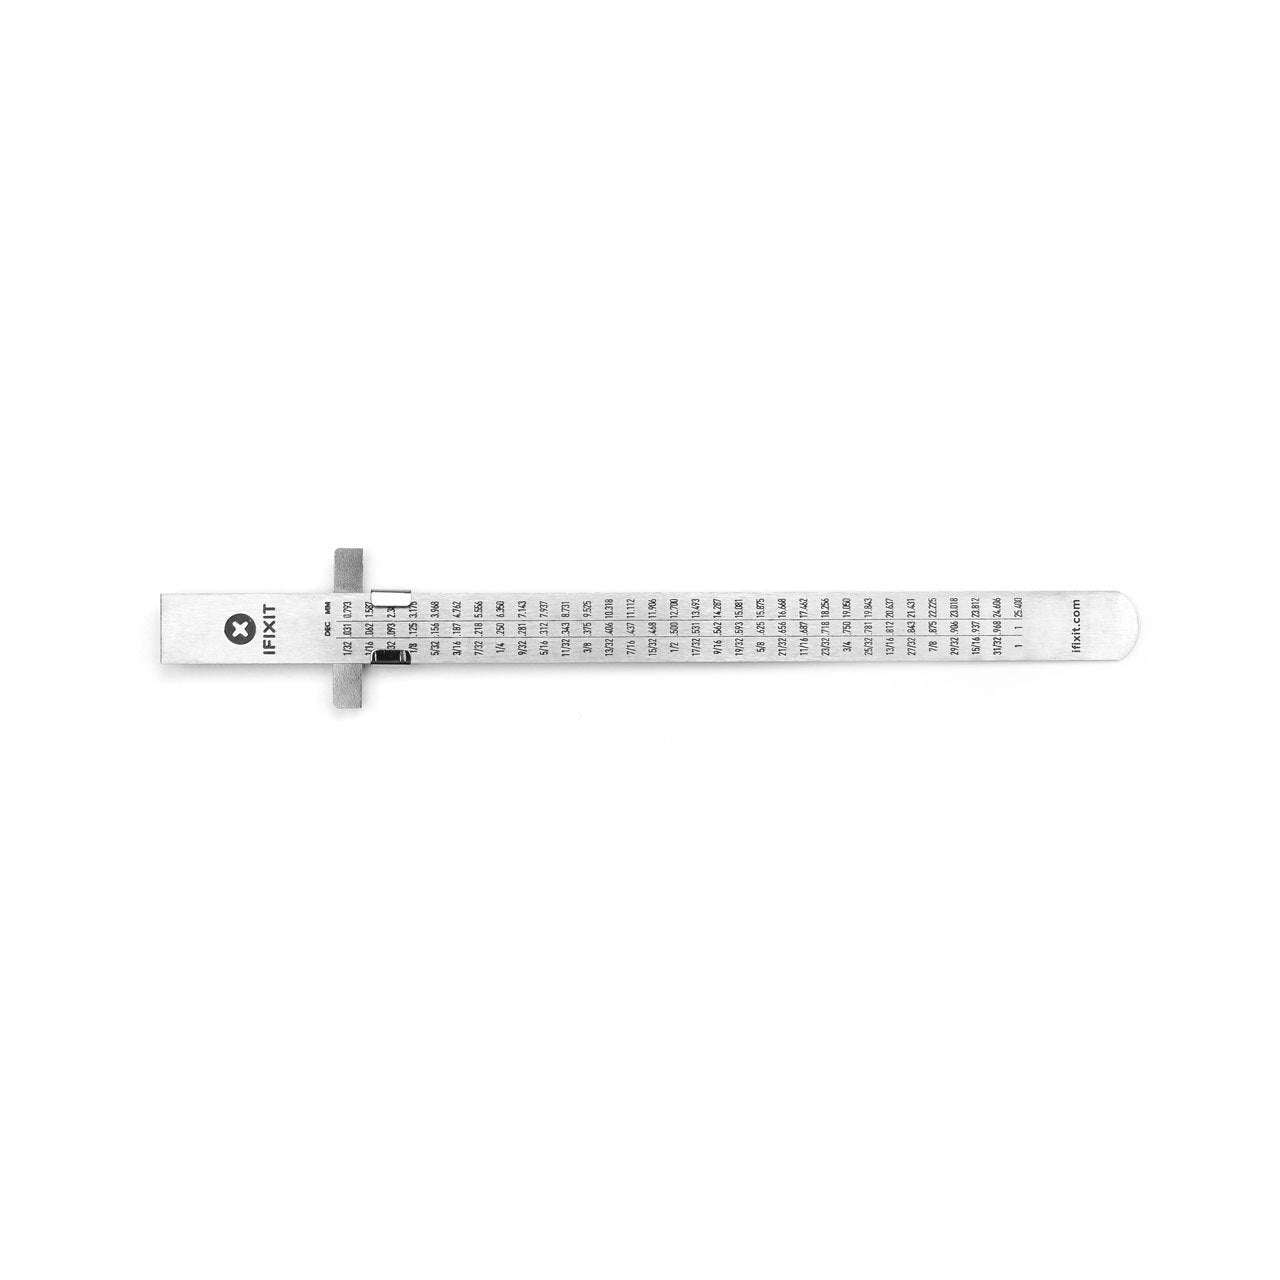 iFixit 6 Inch Metal Ruler